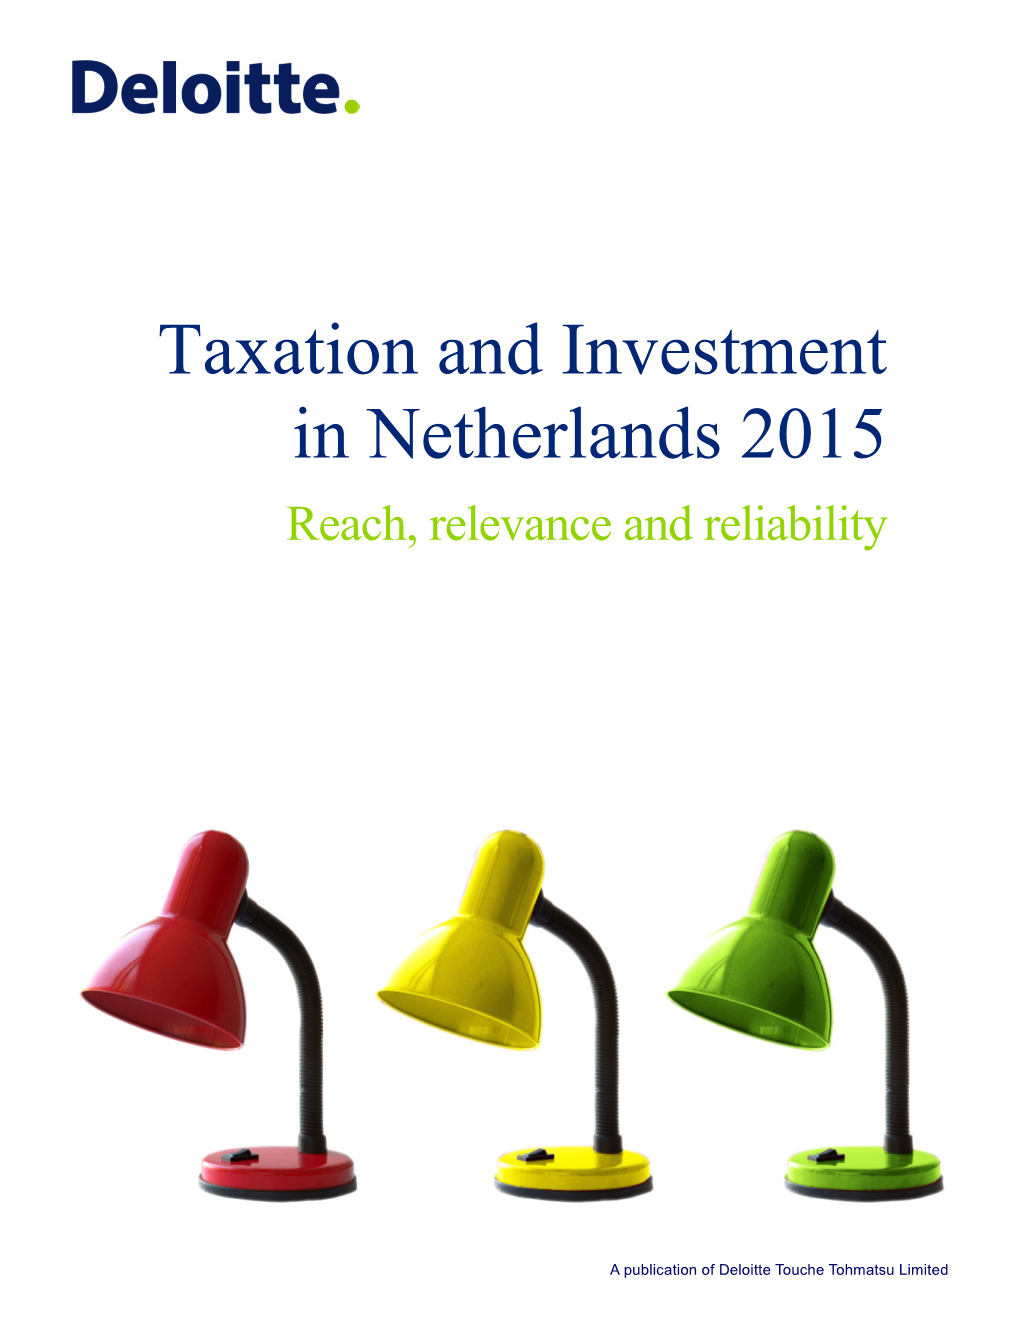 Taxation and Investment in Netherlands 2015 Reach, Relevance and Reliability